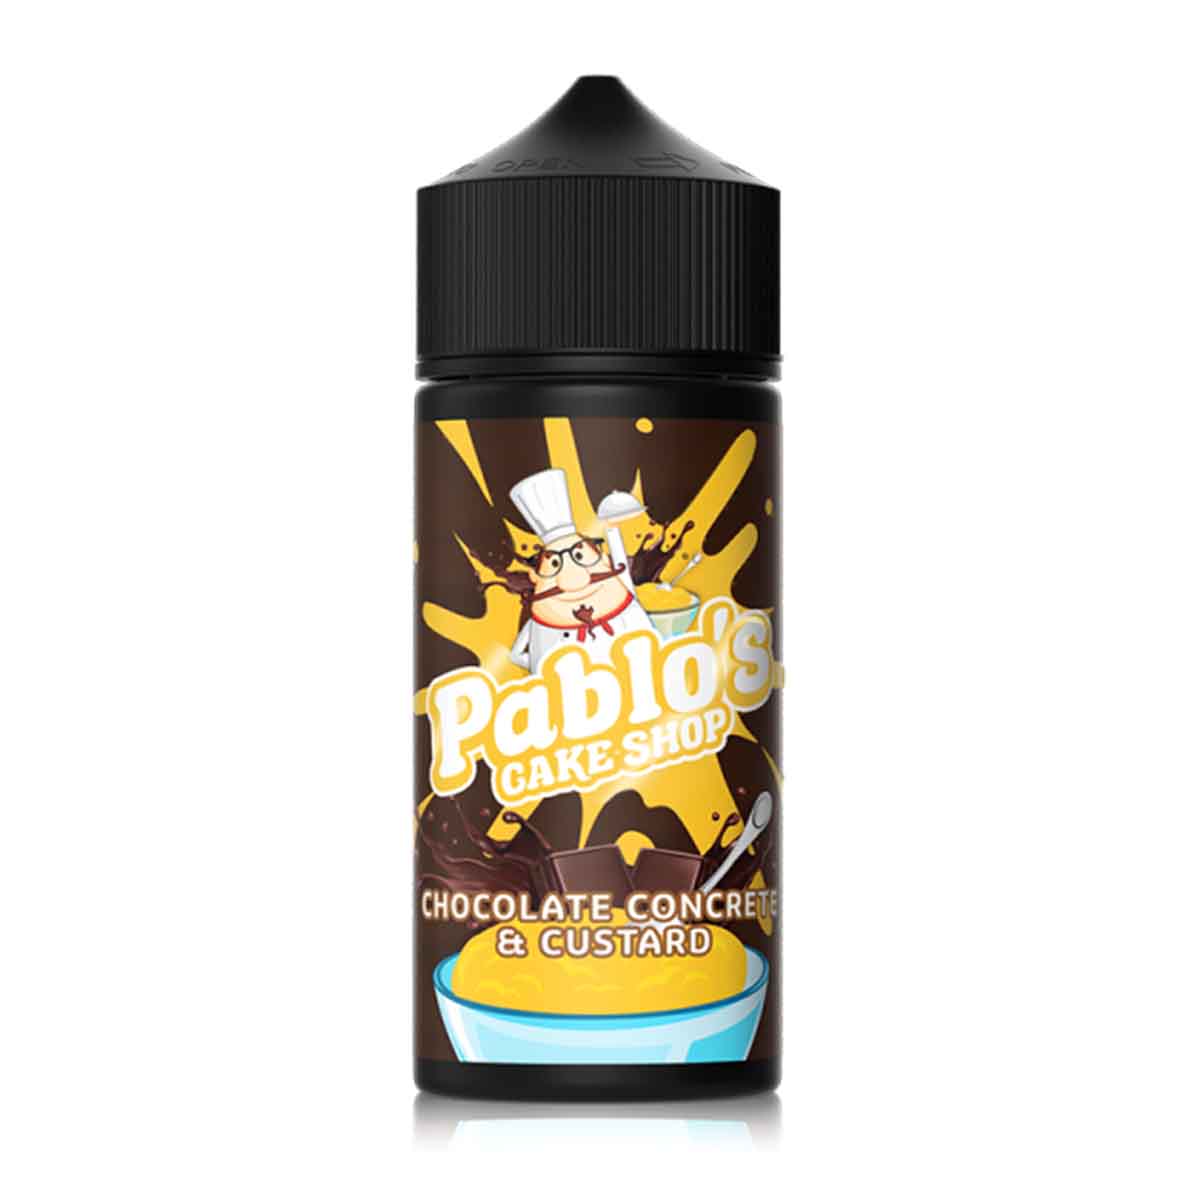 Chocolate Concrete and Custard by Pablo's Cake Shop Short Fill 100ml